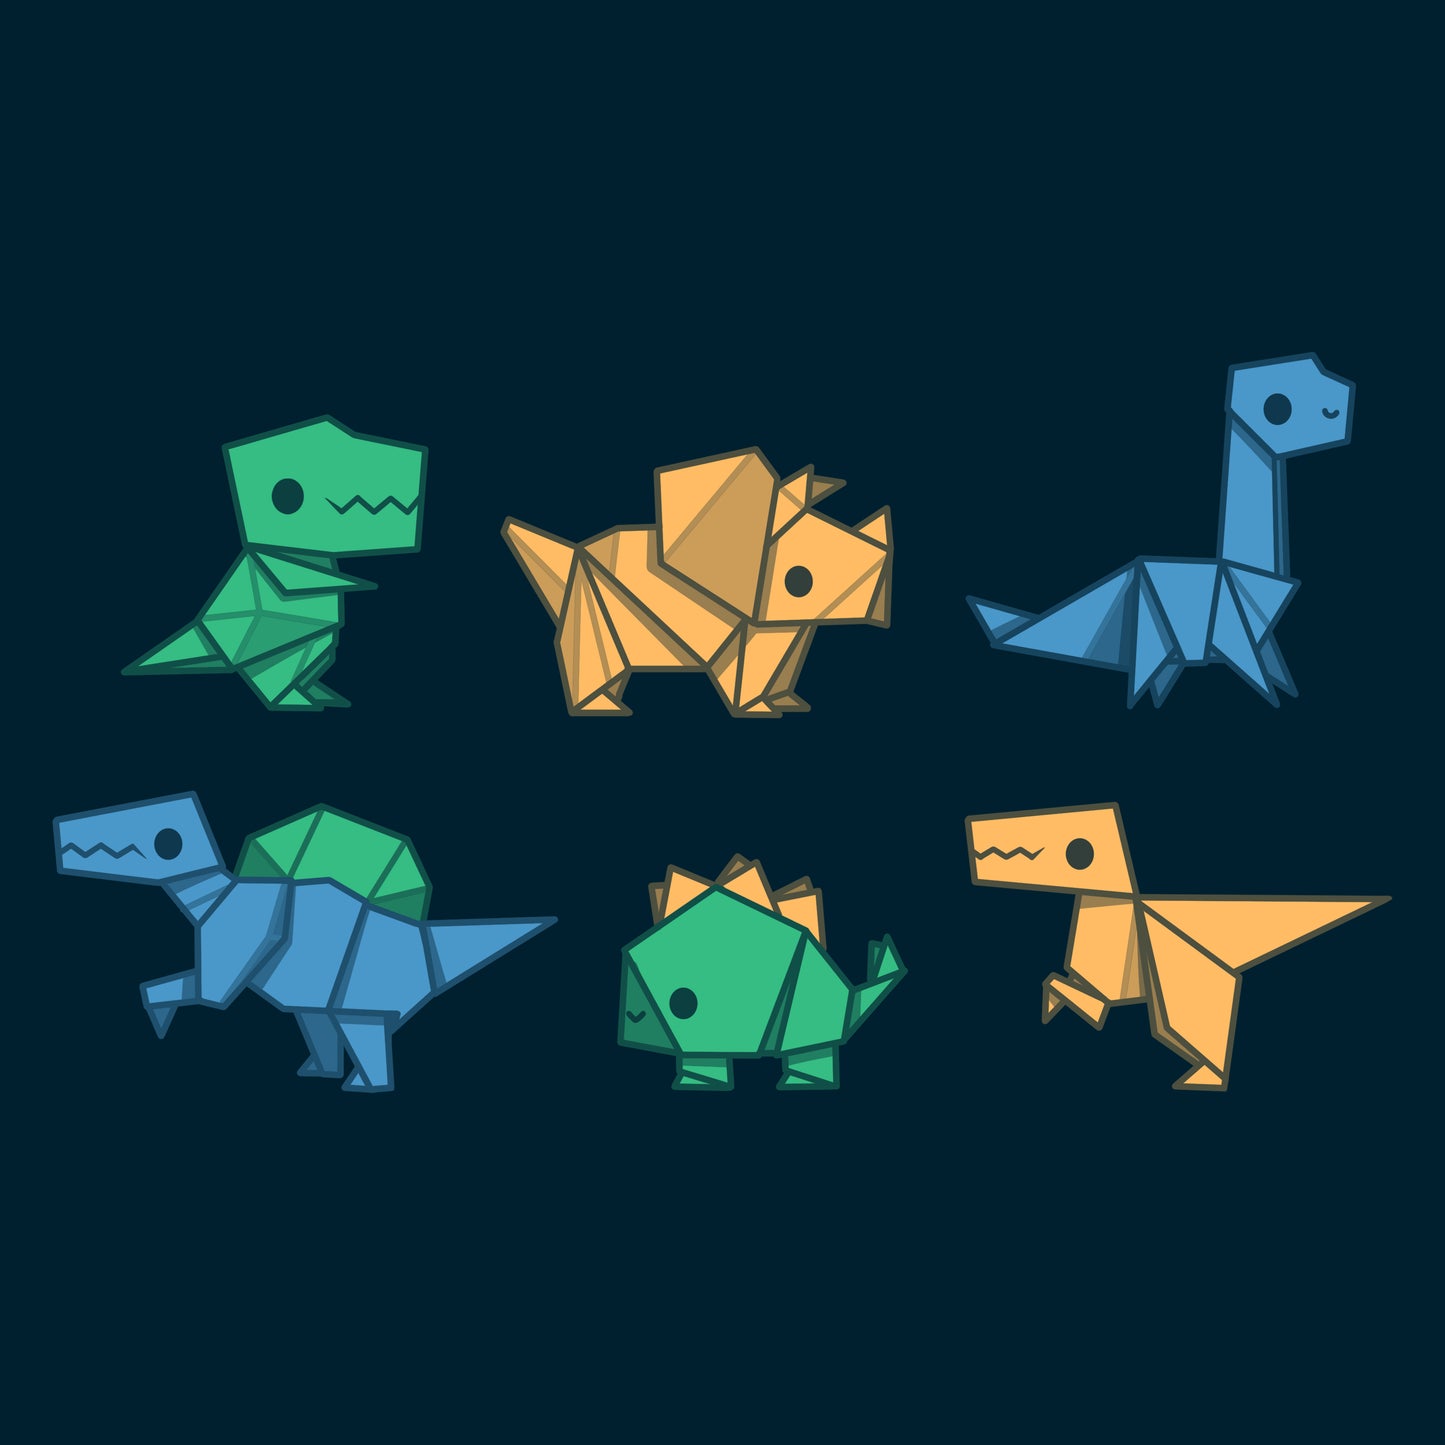 A collection of TeeTurtle Origami Dinos displayed on a dark background.